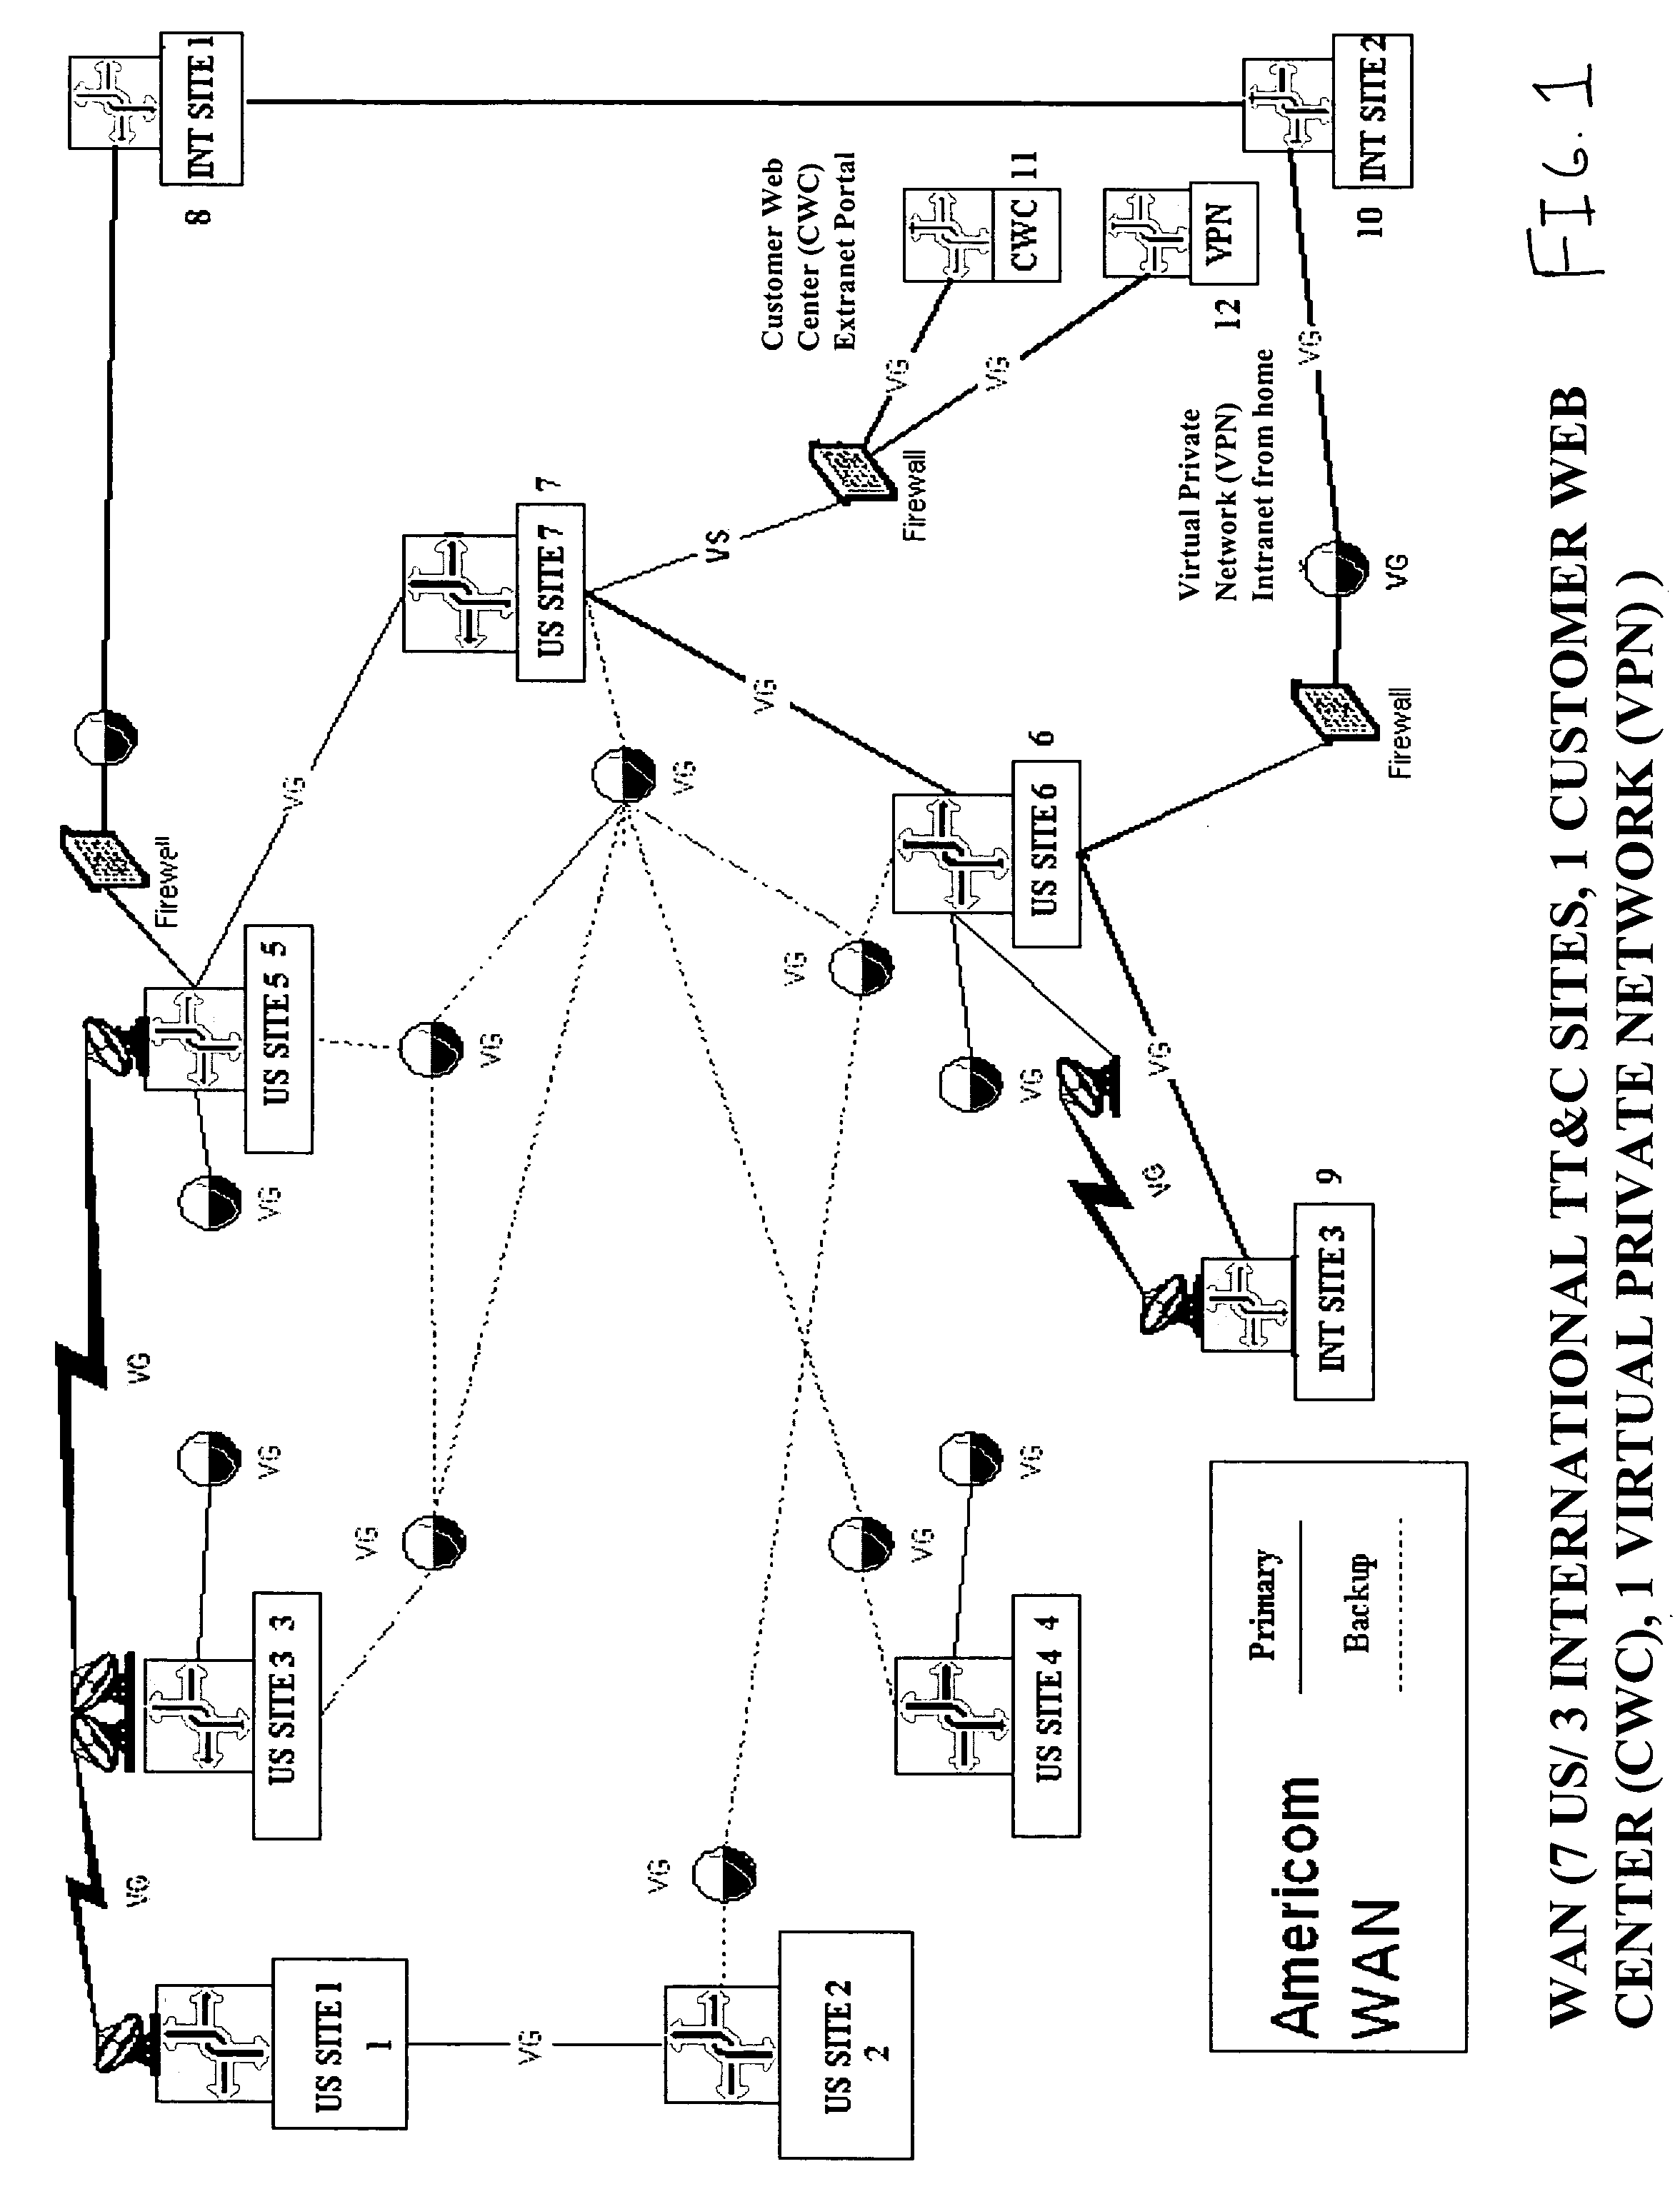 System and method of providing N-tiered enterprise/web-based management, procedure coordination, and control of a geosynchronous satellite fleet